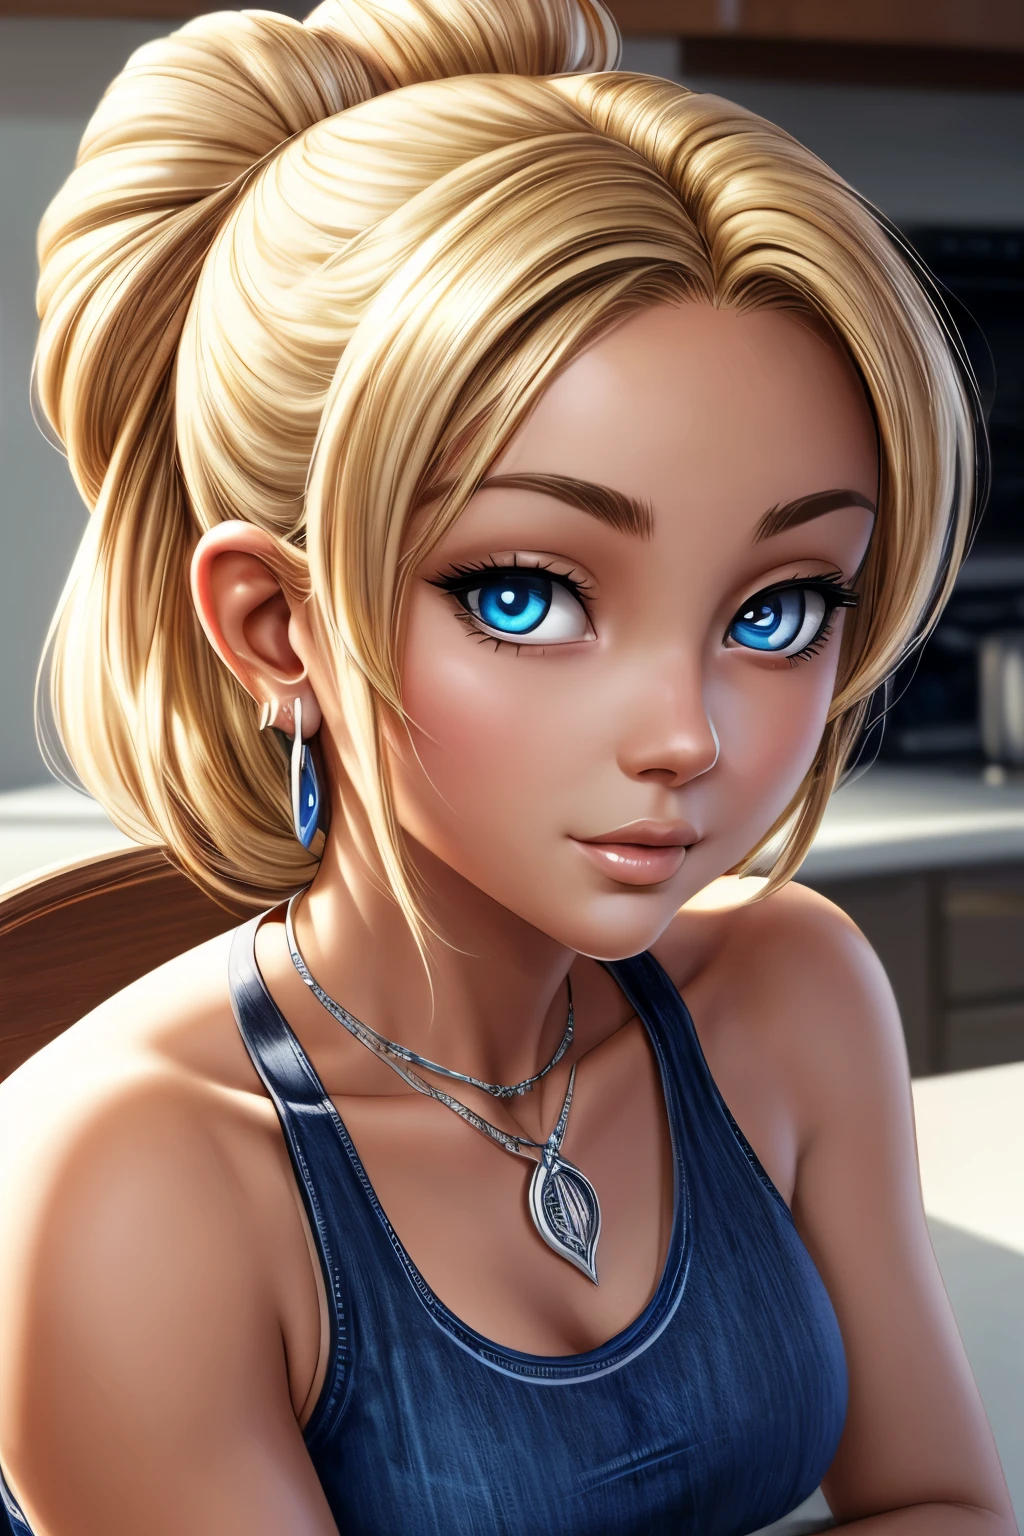 ((ultra quality)), ((tmasterpiece)), gnome girl, Short stature, ((blonde woman, hairlong)), (silver ear rings), (silver necklace around the neck), (Beautiful cute face), (beautiful female lips), Charming, ((sexy facial expression)), is looking at the camera, eyes are slightly closed, (Skin color: white), Body glare, ((detailed beautiful female eyes)), ((dark blue eyes)), (juicy female lips), (beautiful female hands), (A bit full figure, bun), ((perfect female figure)), perfect female body, Beautiful waist, Gorgeous hips, Beautiful medium breasts, ((Subtle and beautiful)), sits seductively on a chair (close-up of the face), (wearing blackface jeans, white tanktop) background: in a kitchen ((Depth of field)), ((high quality clear image)), (crisp details), ((higly detailed)), Realistic, Professional Photo Session, ((Clear Focus)), the anime